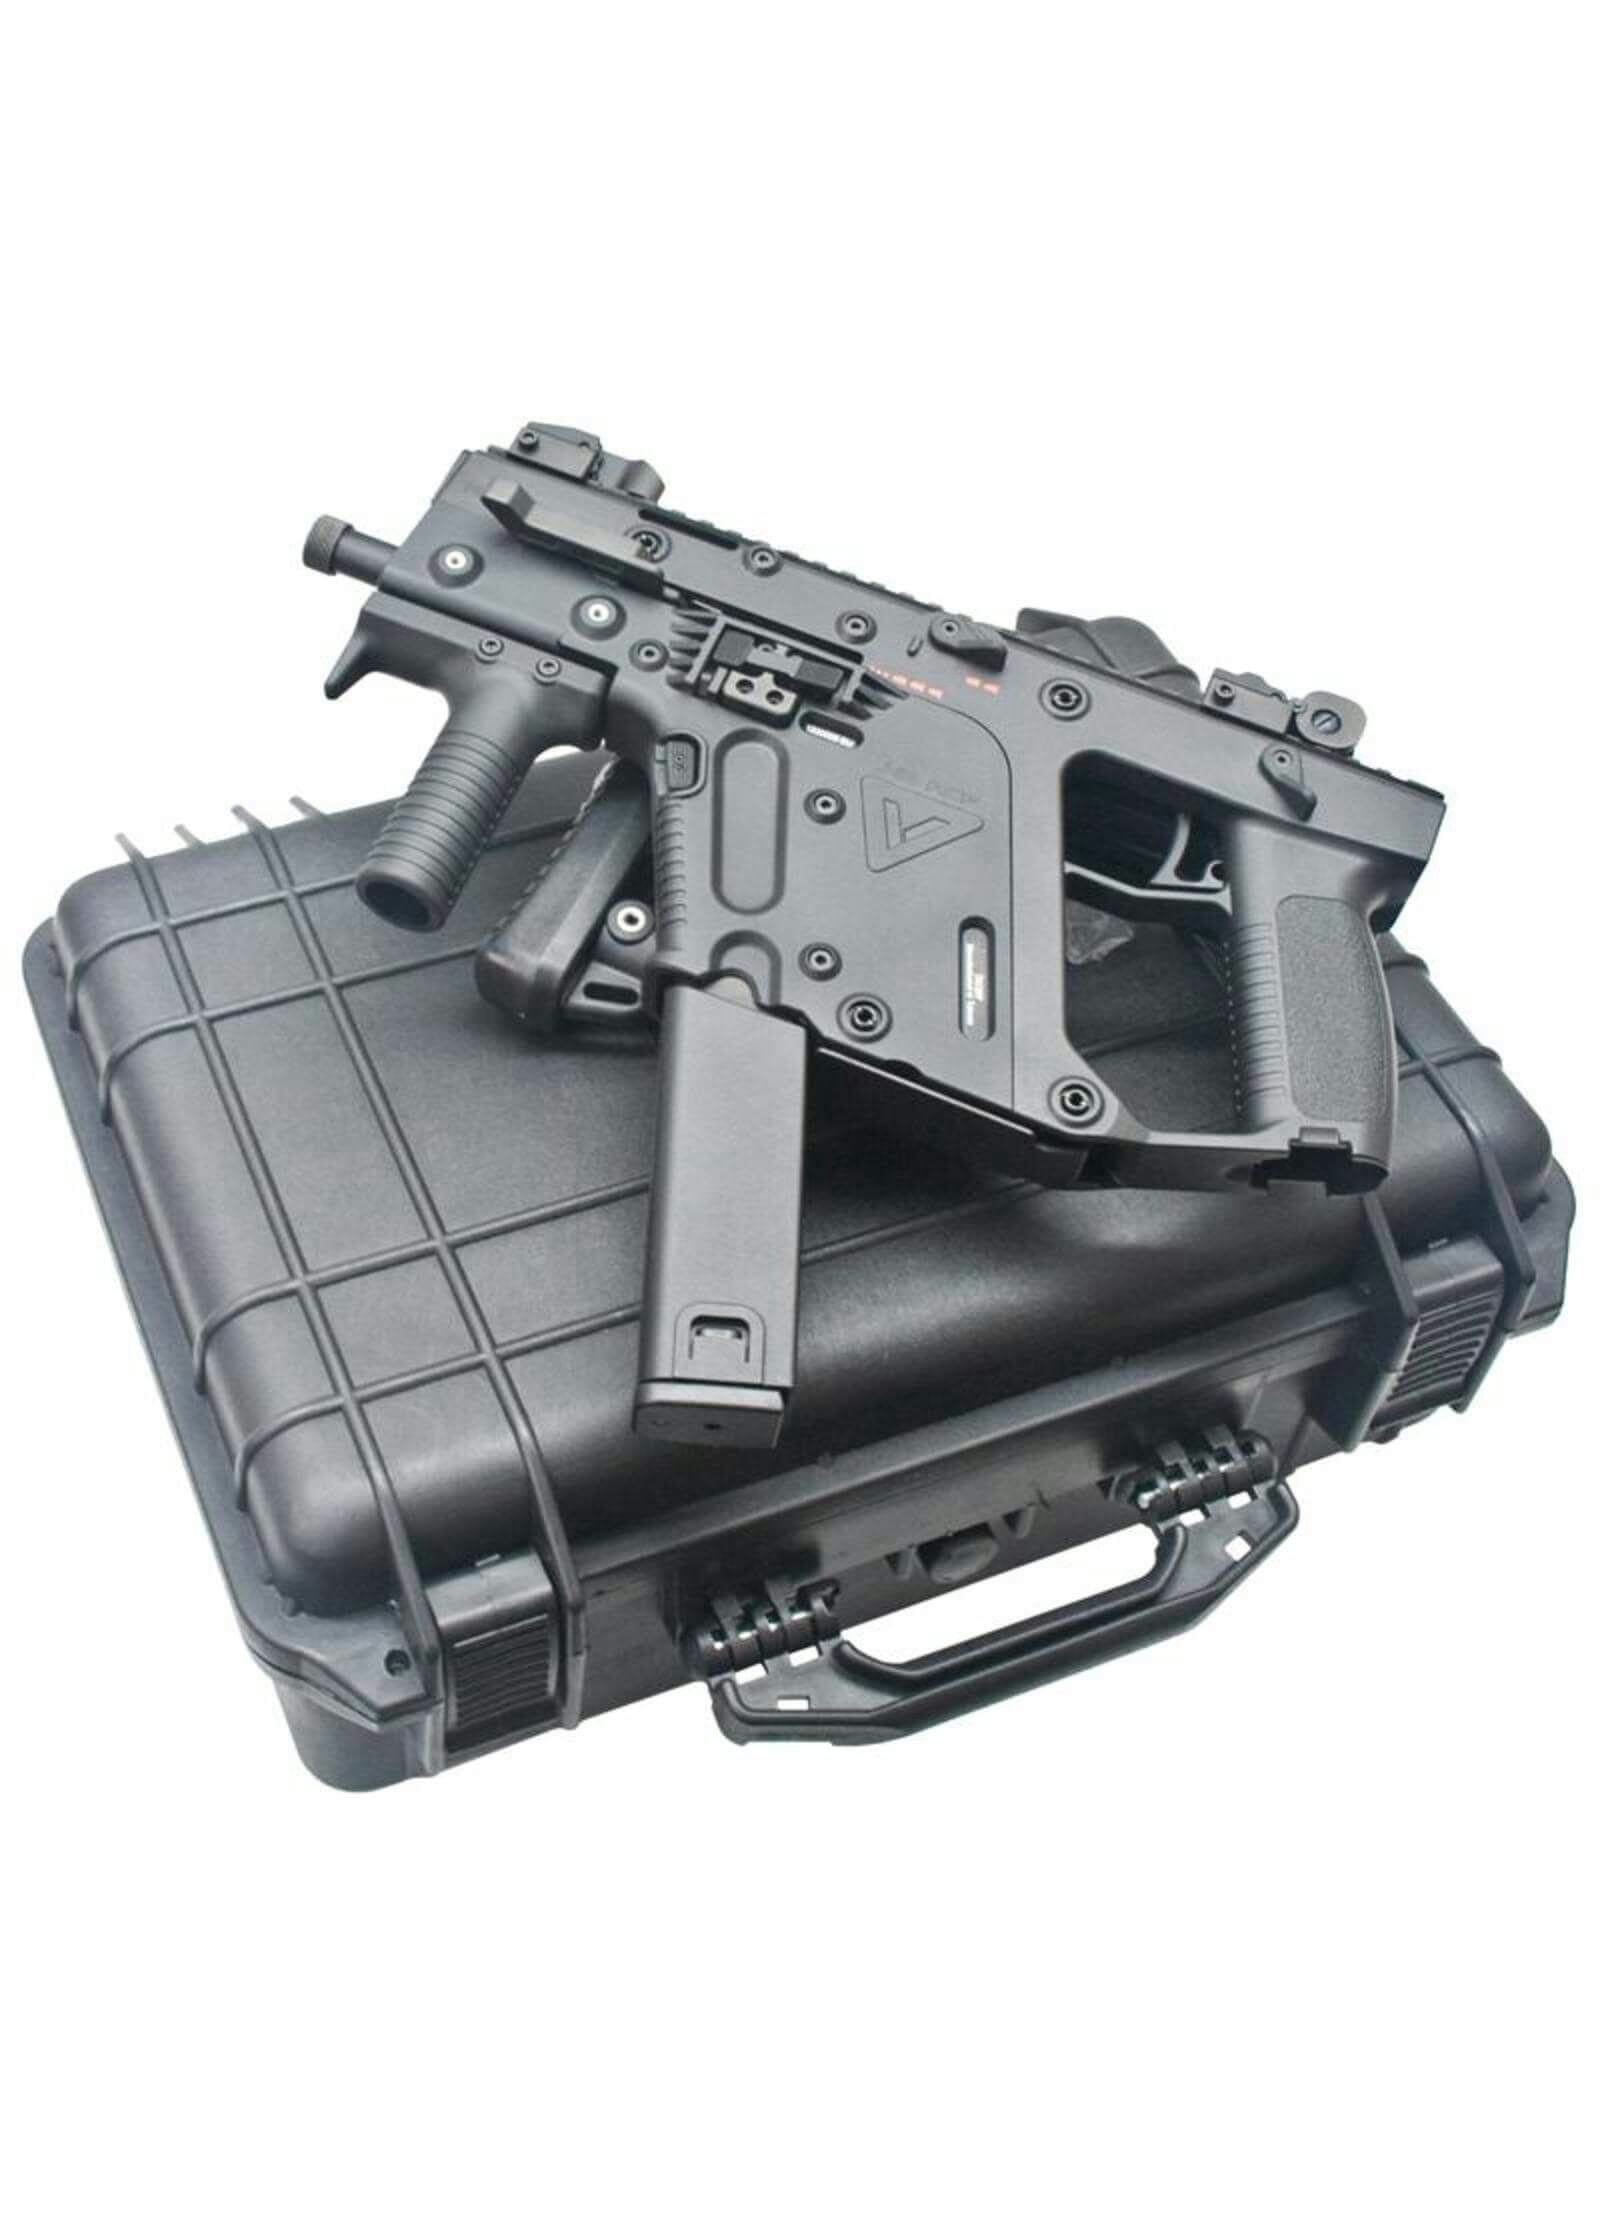 KWA KRISS Vector Carry Case